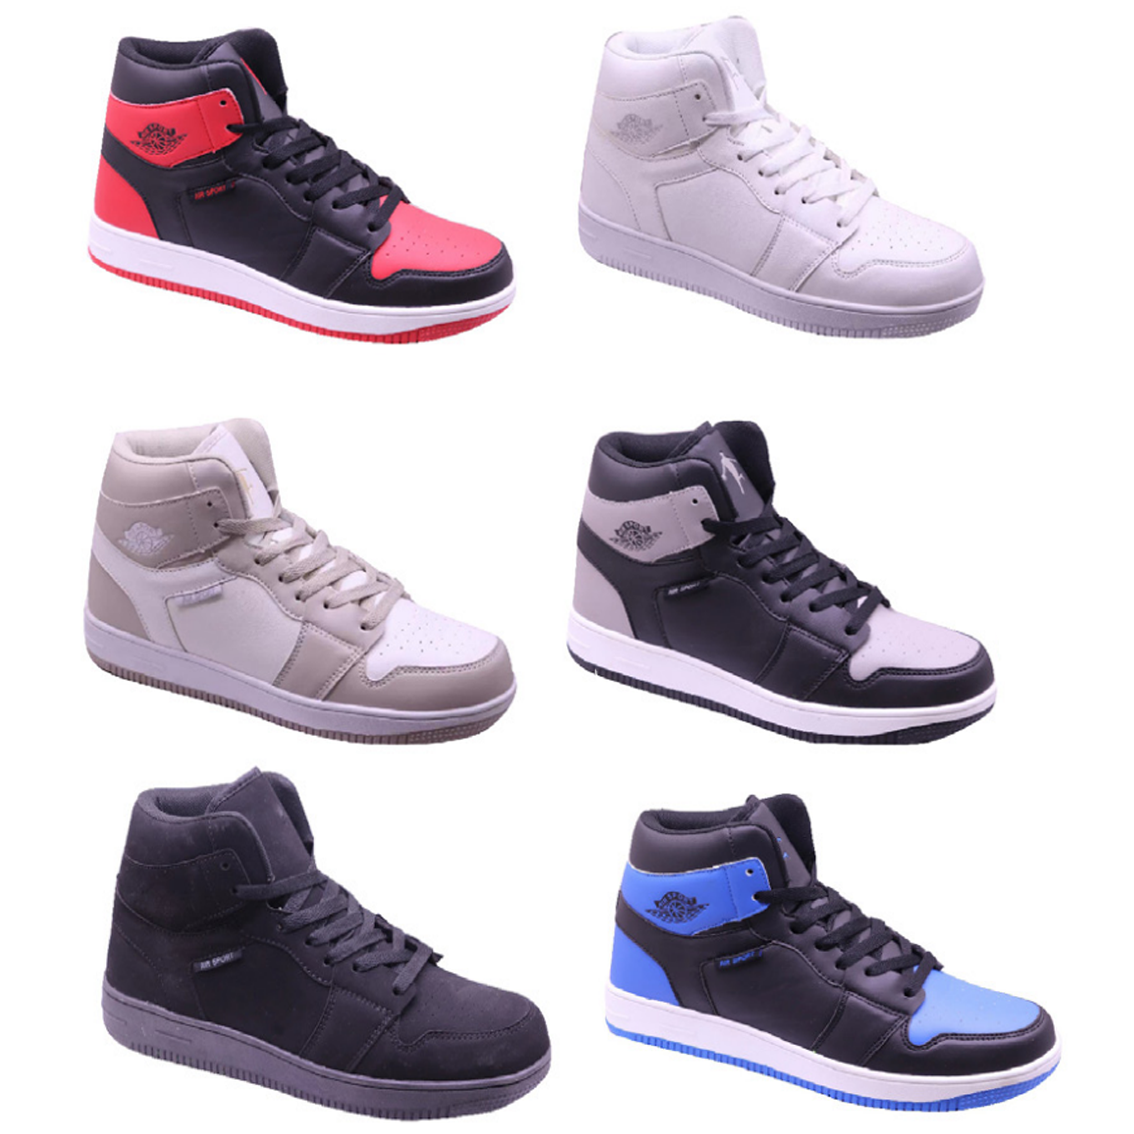 Wholesale Men's SHOES Lace Up Sneakers High Top Runners Hugh NPE69